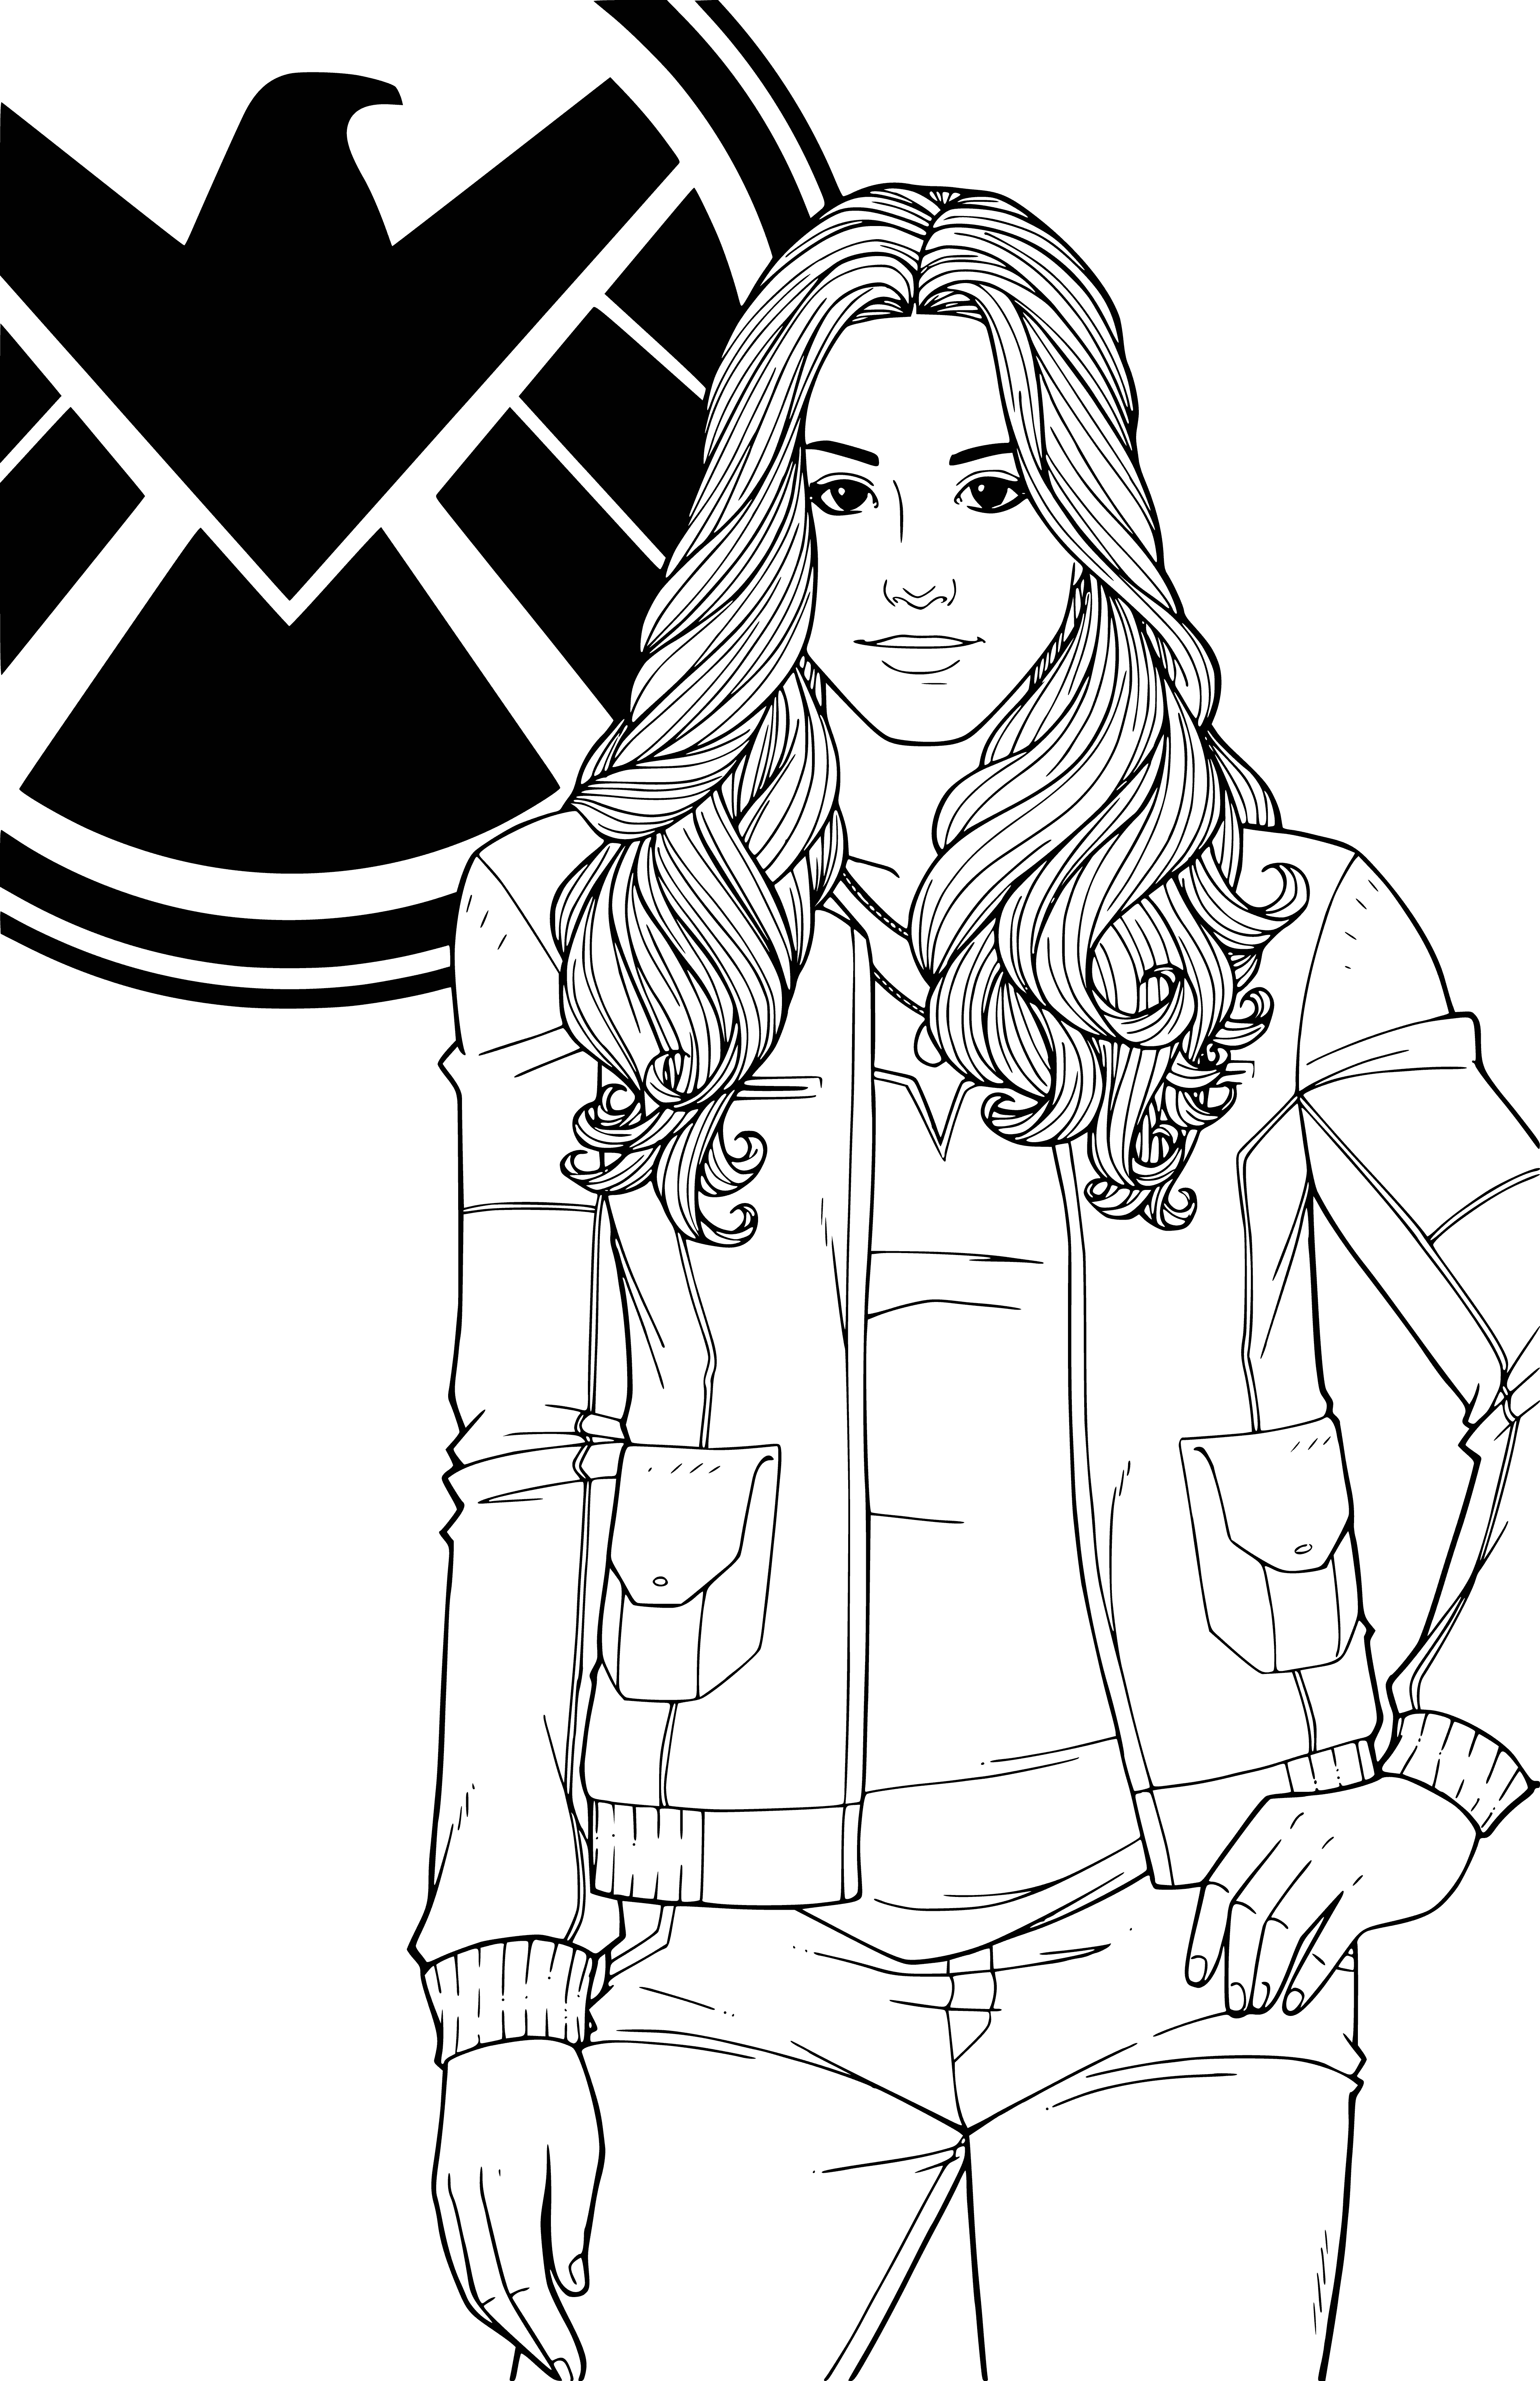 Agent SHIELD T. Daisy Johnson coloring page